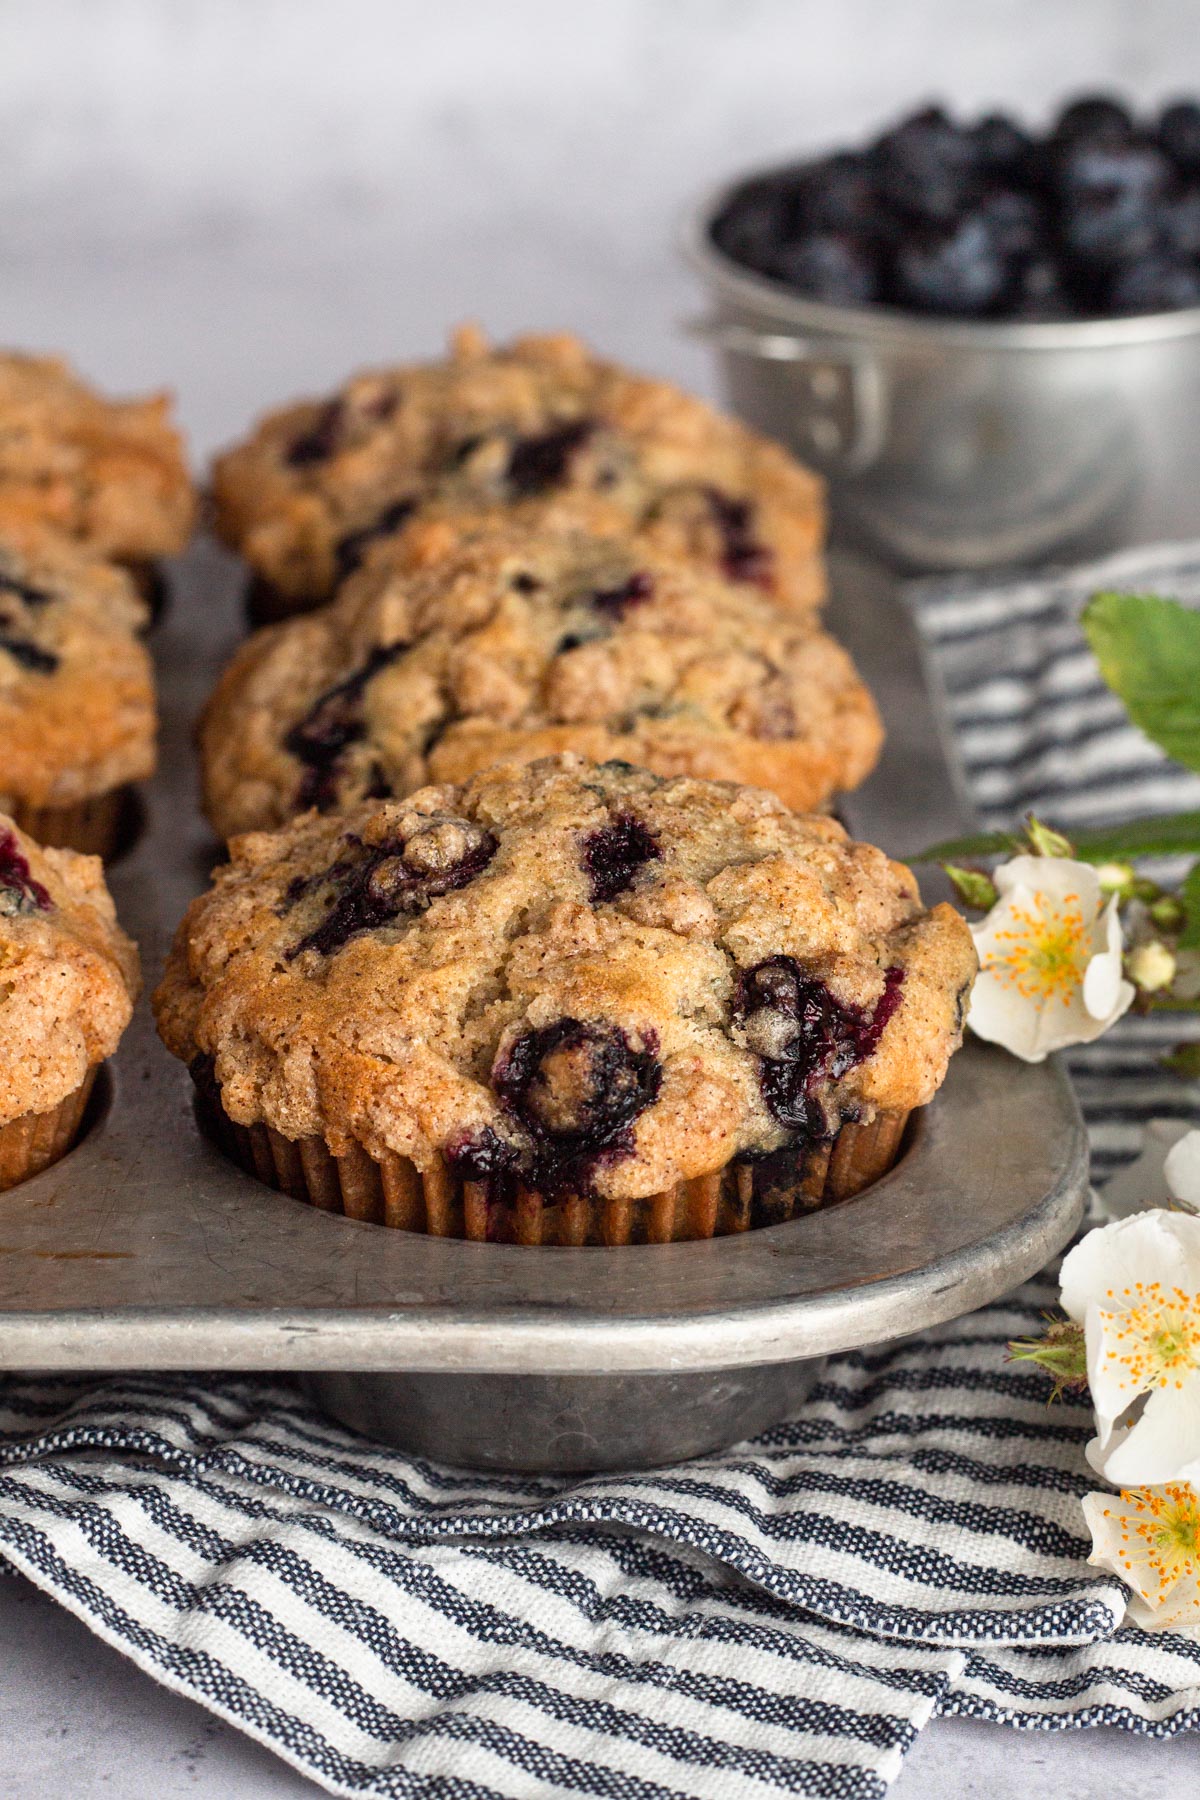 Angled view of blueberry muffins in a metal muffin tin with a striped blue napkin and white flowers.